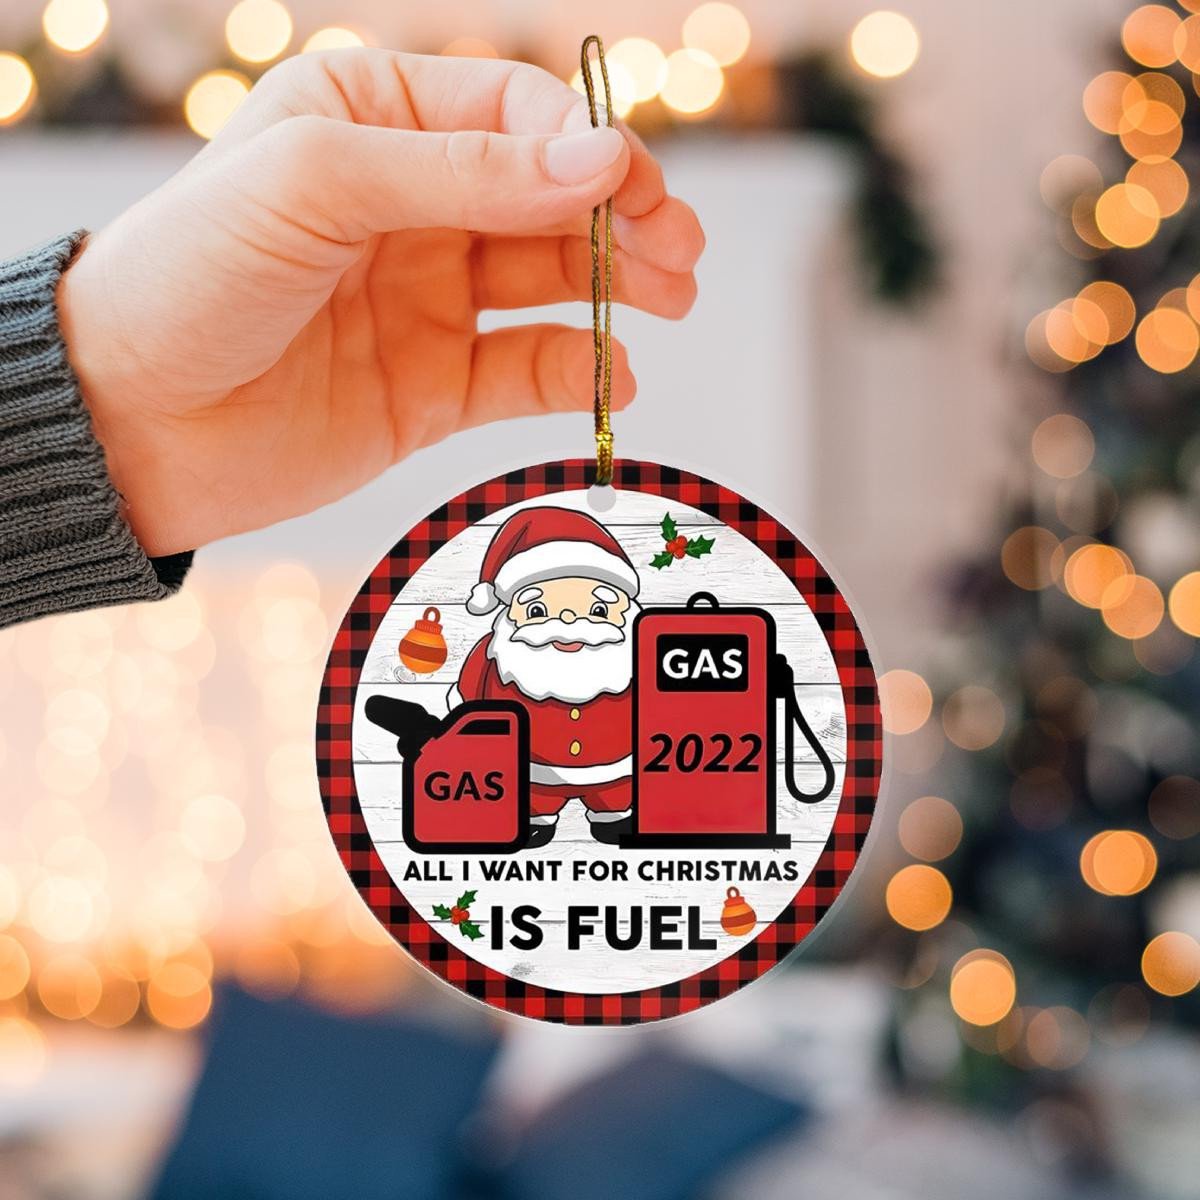 Santa All I Want For Christmas Is Fuel - Christmas Custom Plastic Acrylic Ornaments Xmas Gifts for Family Friends